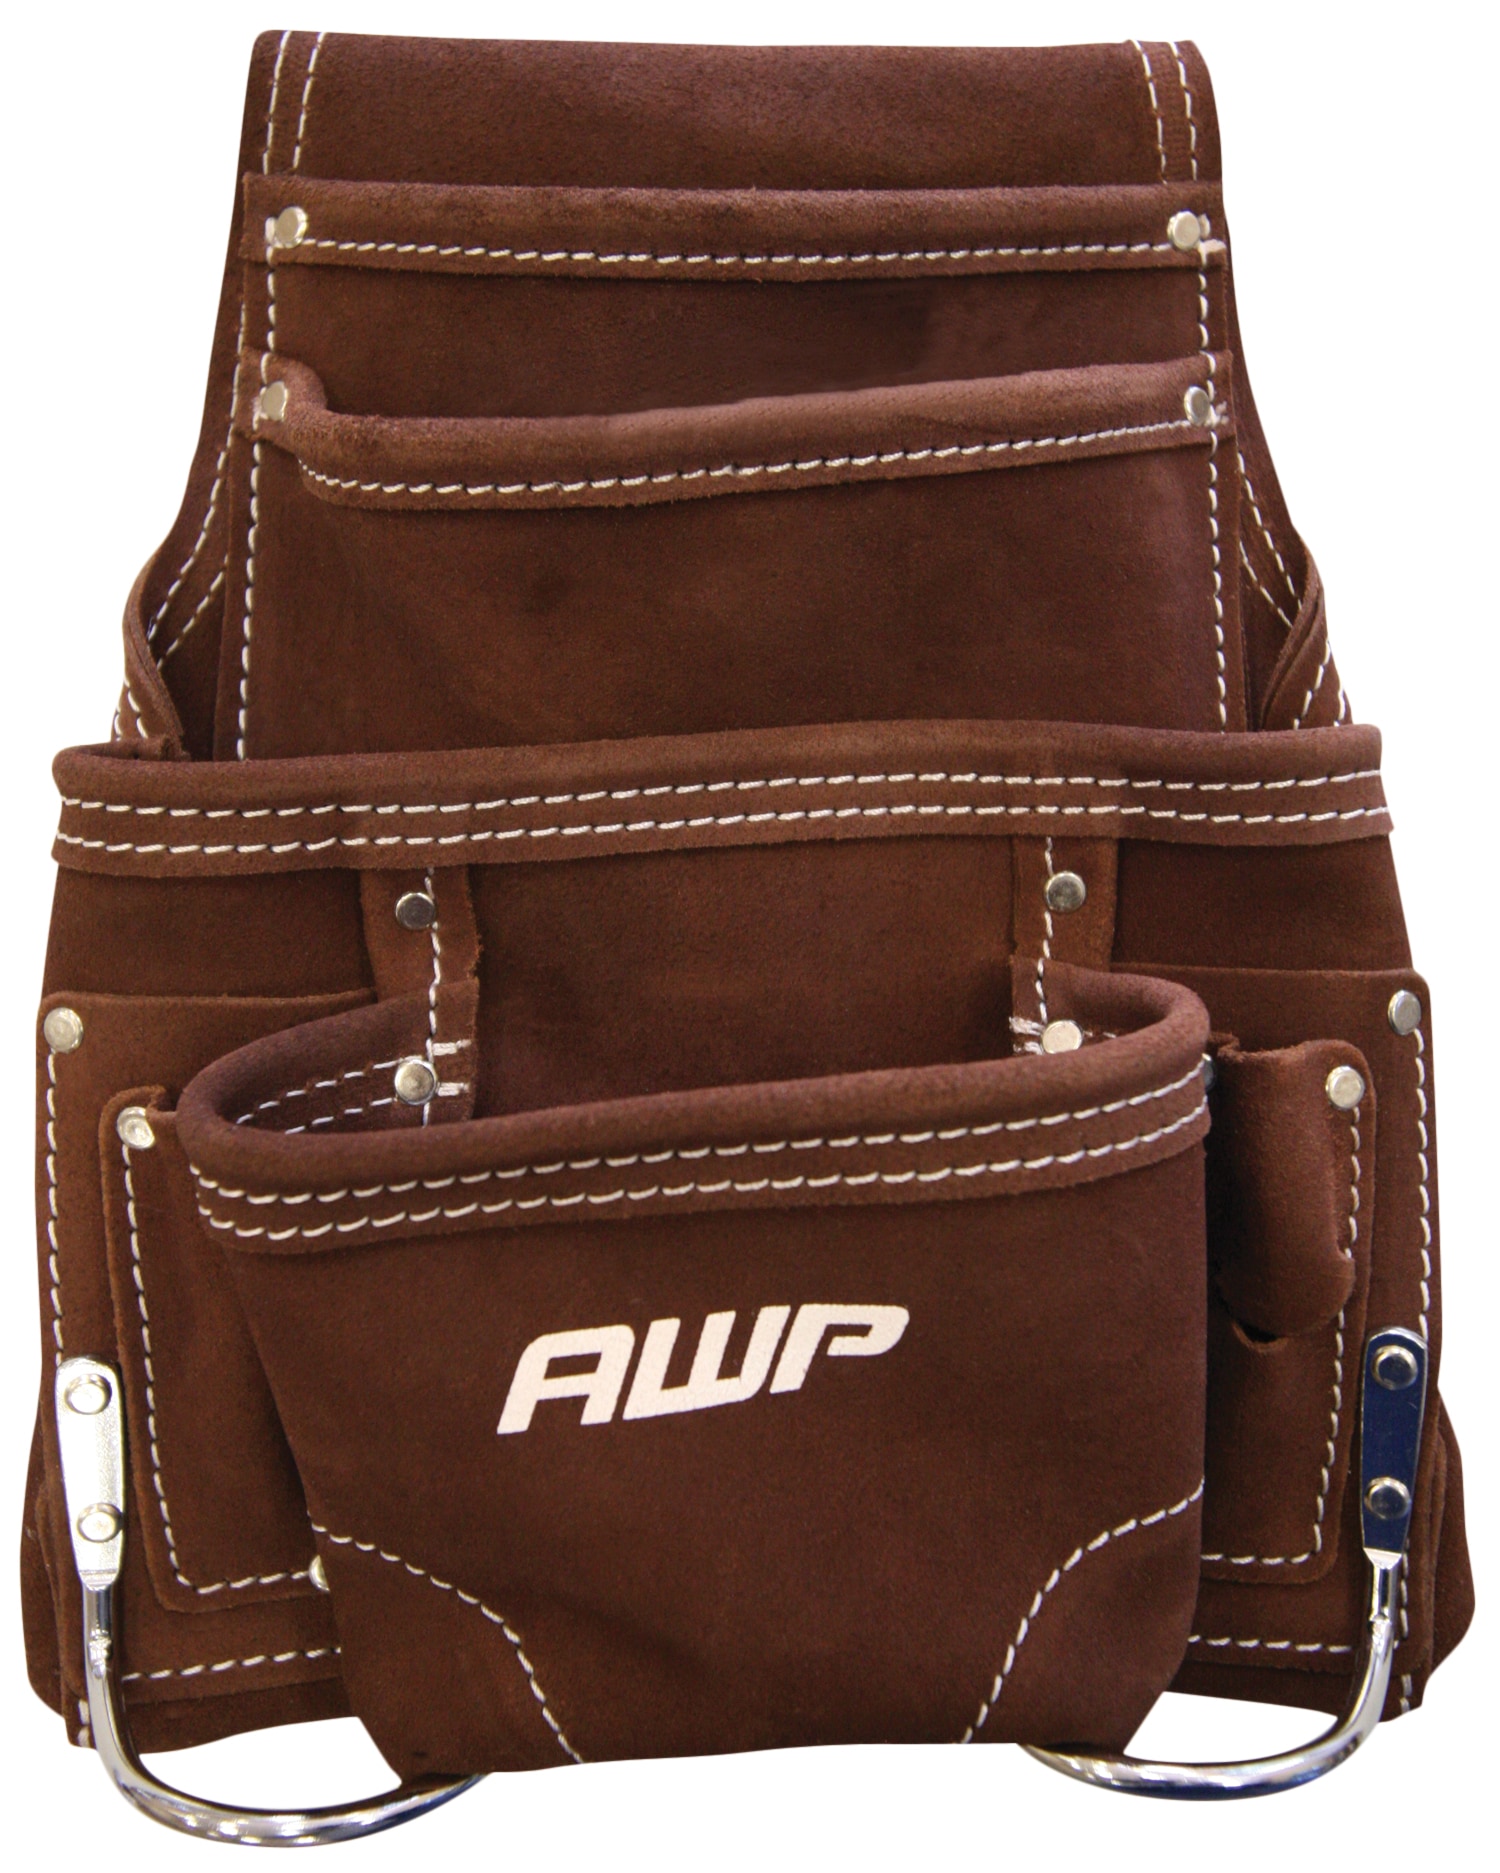 AWP Organizer Tool Pouch | 7 Pockets & Loops for Tool Organization |  Heavy-Duty Metal Belt Clip Attachment